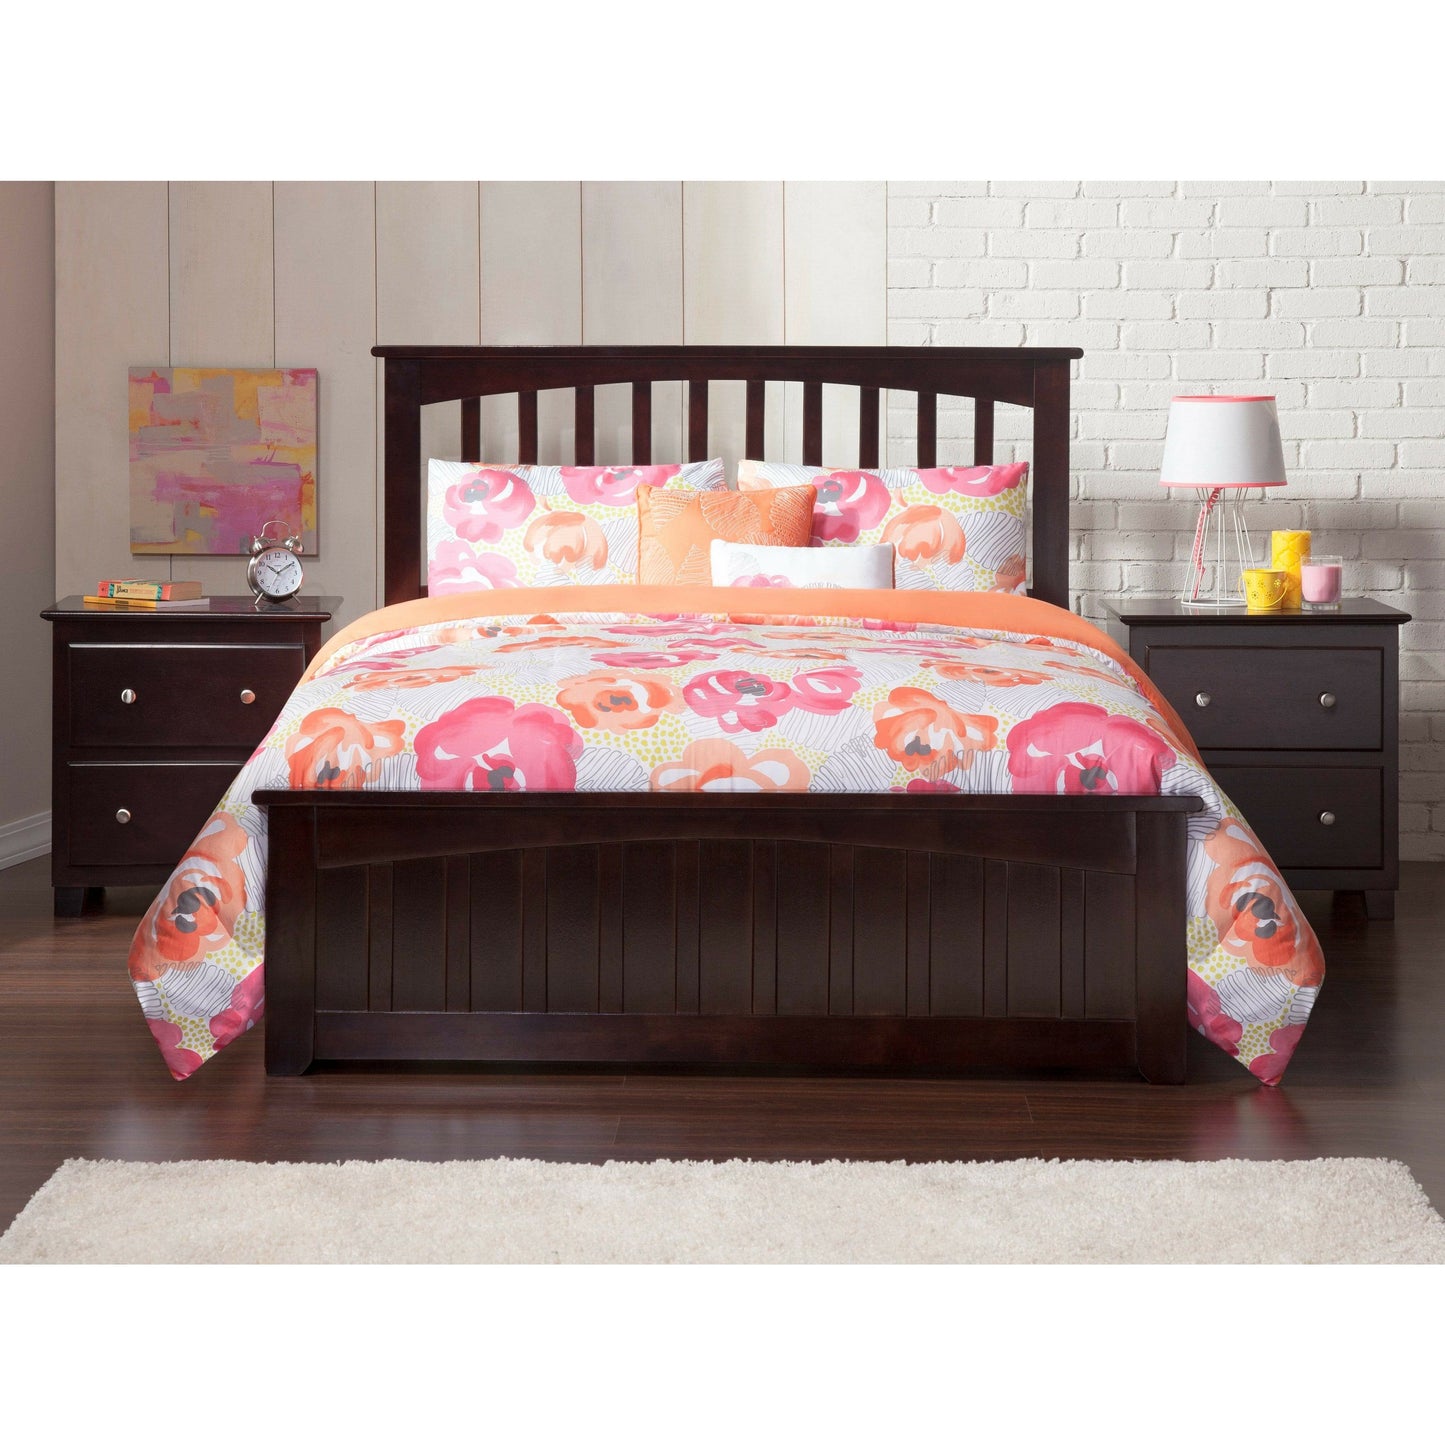 Atlantic Furniture Bed Mission Queen Platform Bed with Flat Panel Foot Board and 2 Urban Bed Drawers in Espresso